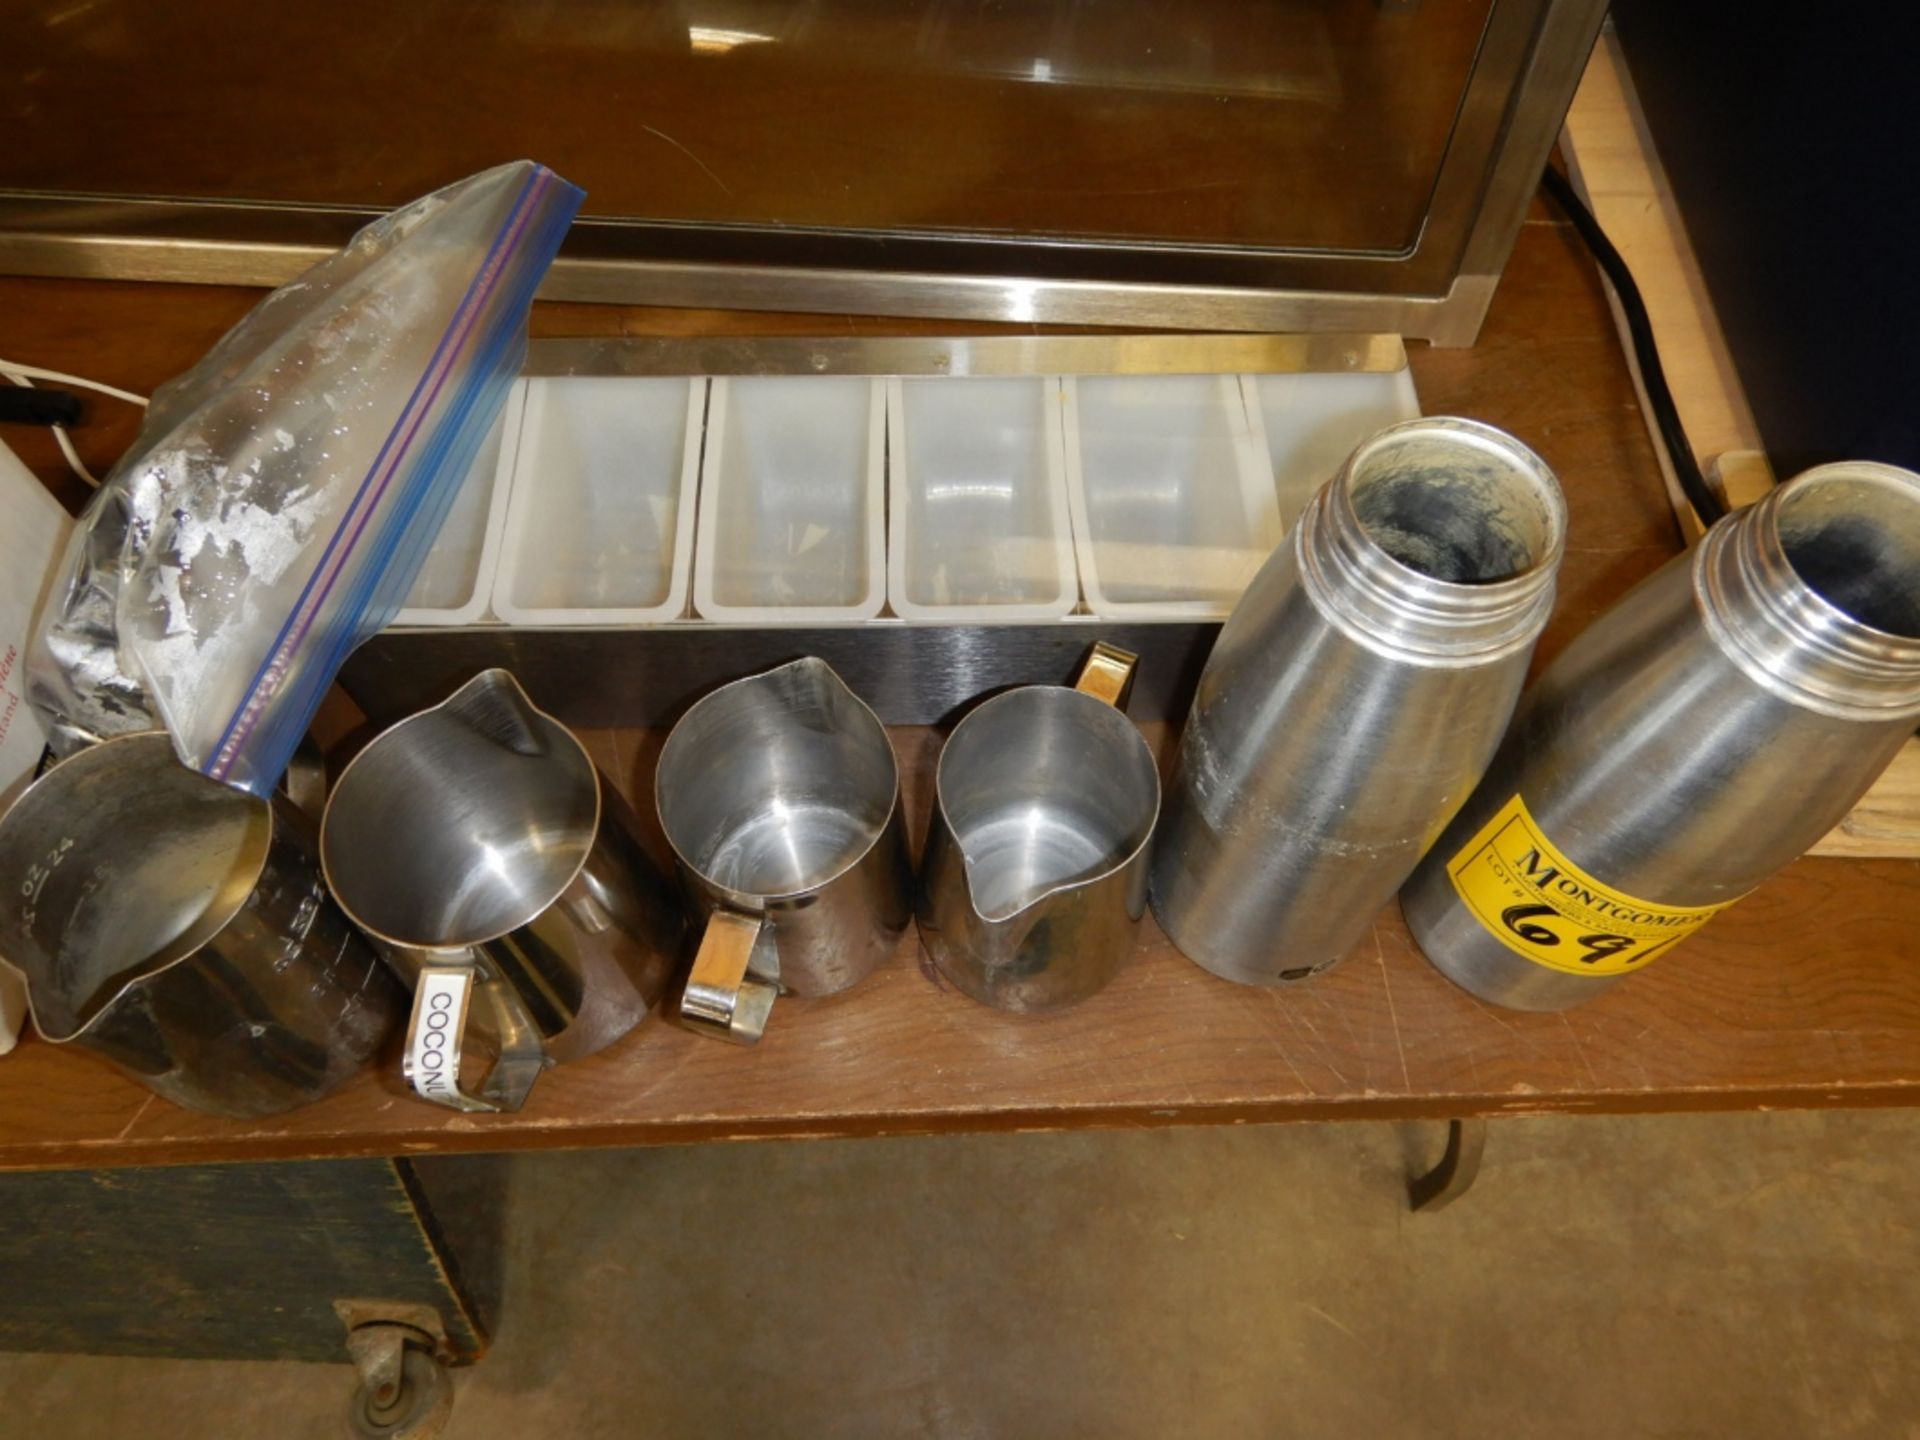 L/O ASSORTED EXPRESSO MACHINE REPAIRS, CLEANERS, SS STEAM CUPS, PUNCH BOWL, SSCONDOMENT DISPENSER, - Image 4 of 7